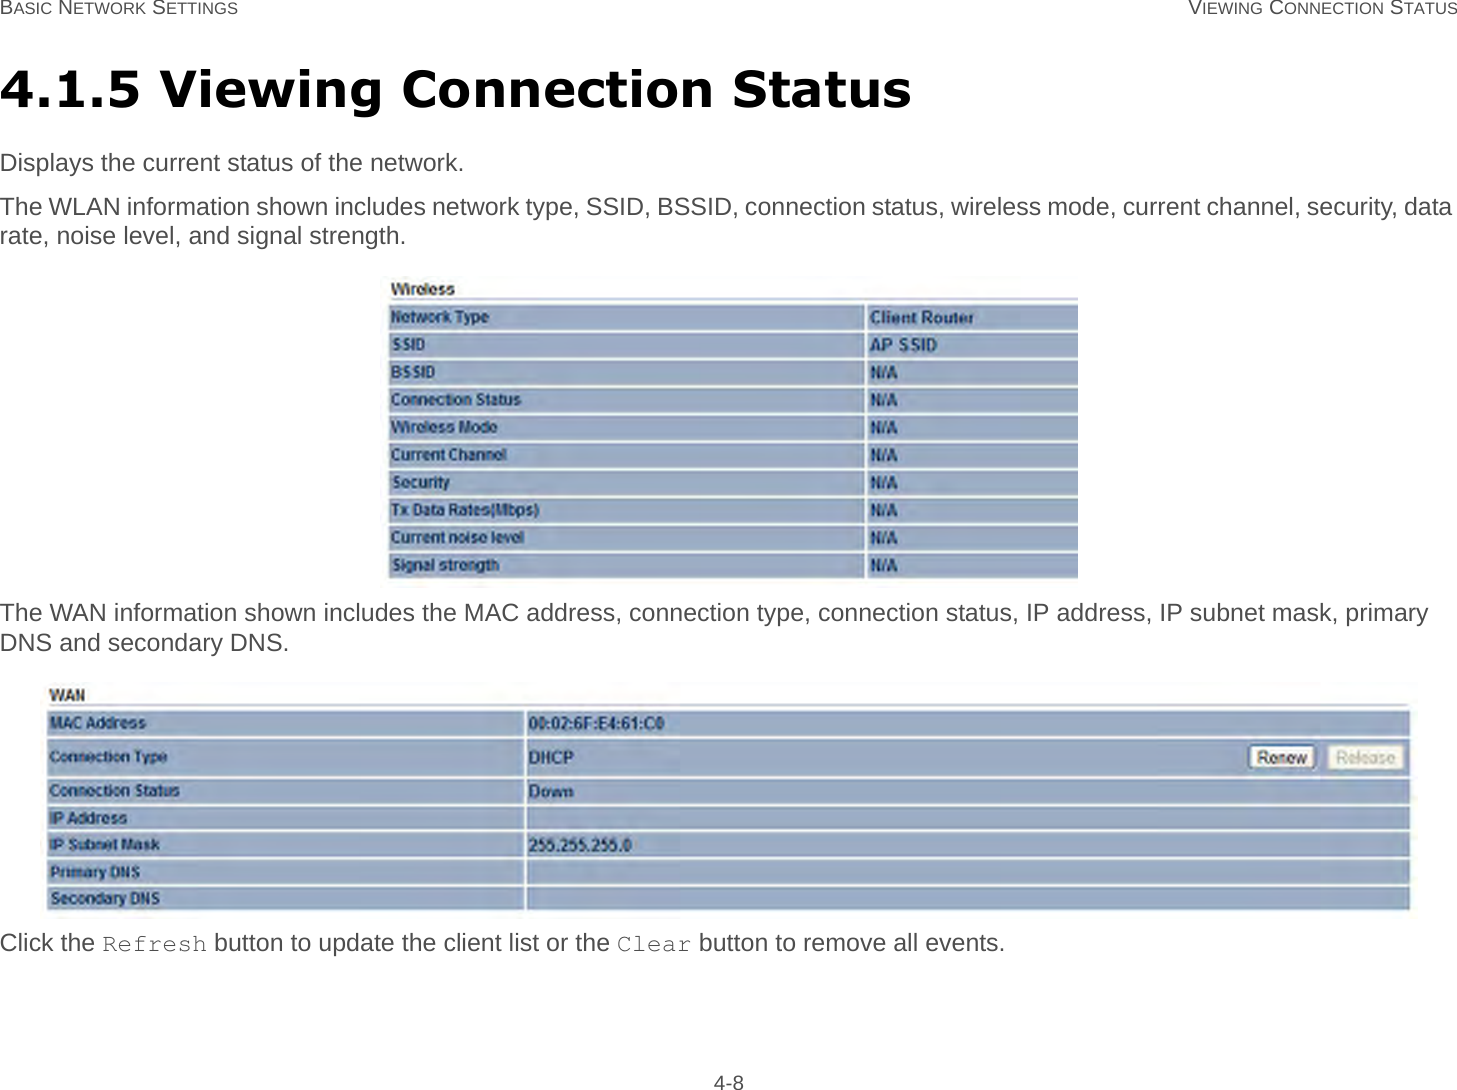 BASIC NETWORK SETTINGS VIEWING CONNECTION STATUS 4-84.1.5 Viewing Connection StatusDisplays the current status of the network.The WLAN information shown includes network type, SSID, BSSID, connection status, wireless mode, current channel, security, data rate, noise level, and signal strength.The WAN information shown includes the MAC address, connection type, connection status, IP address, IP subnet mask, primary DNS and secondary DNS.Click the Refresh button to update the client list or the Clear button to remove all events.